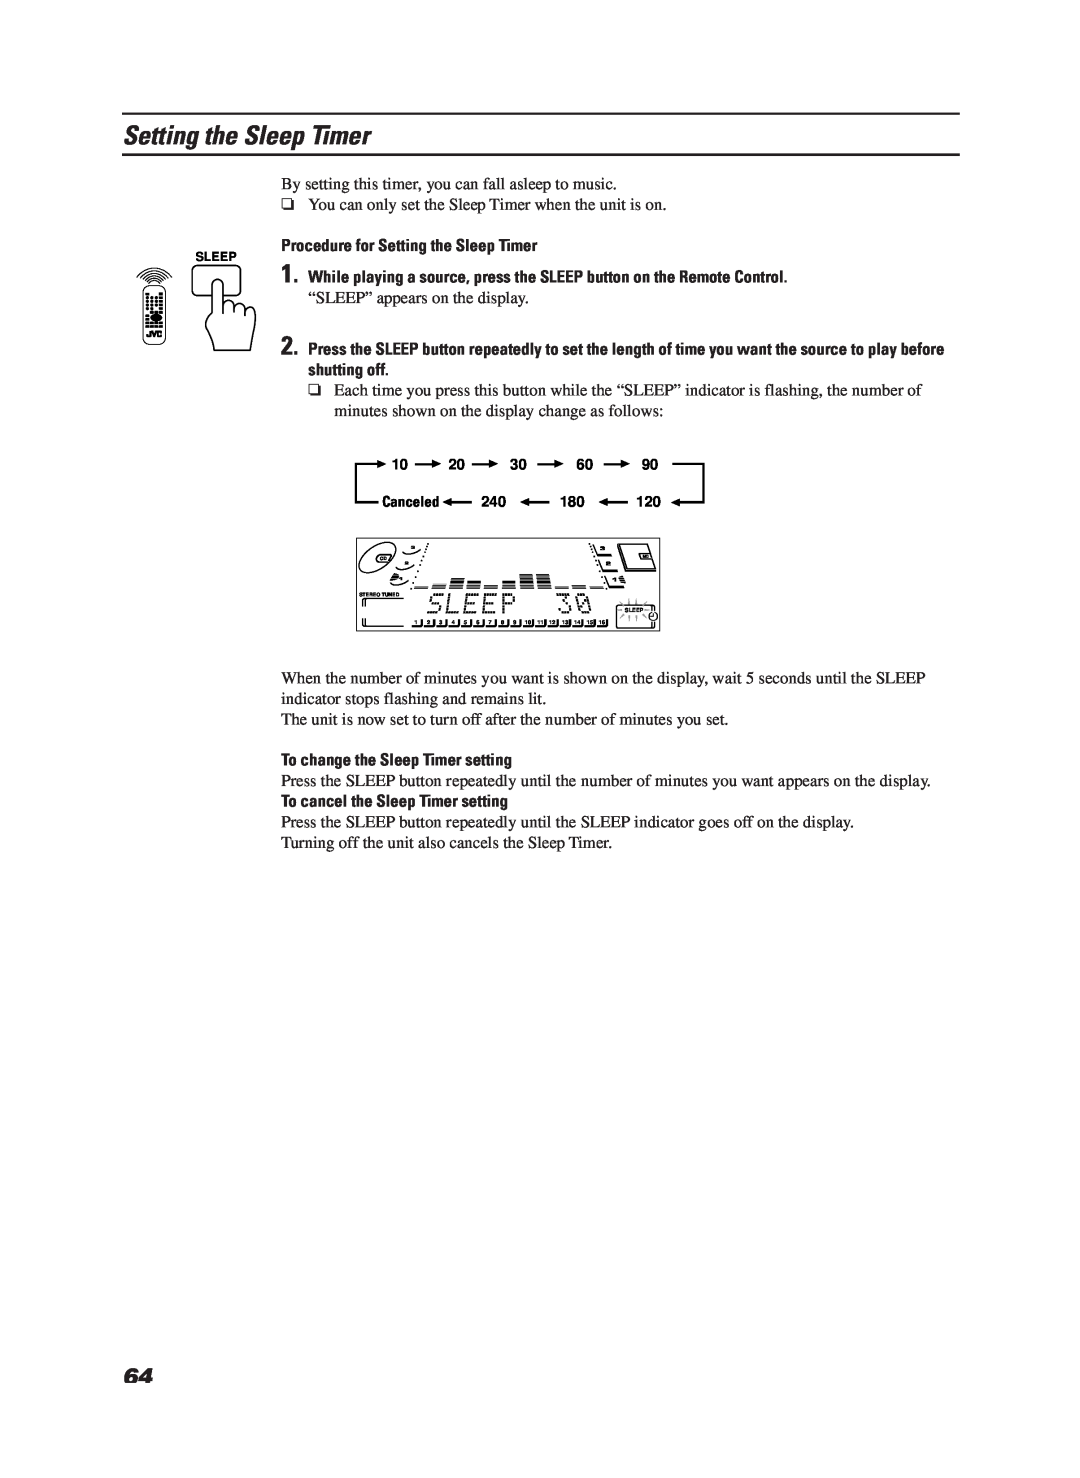 JVC LET0070-002A manual Procedure for Setting the Sleep Timer, To change the Sleep Timer setting 